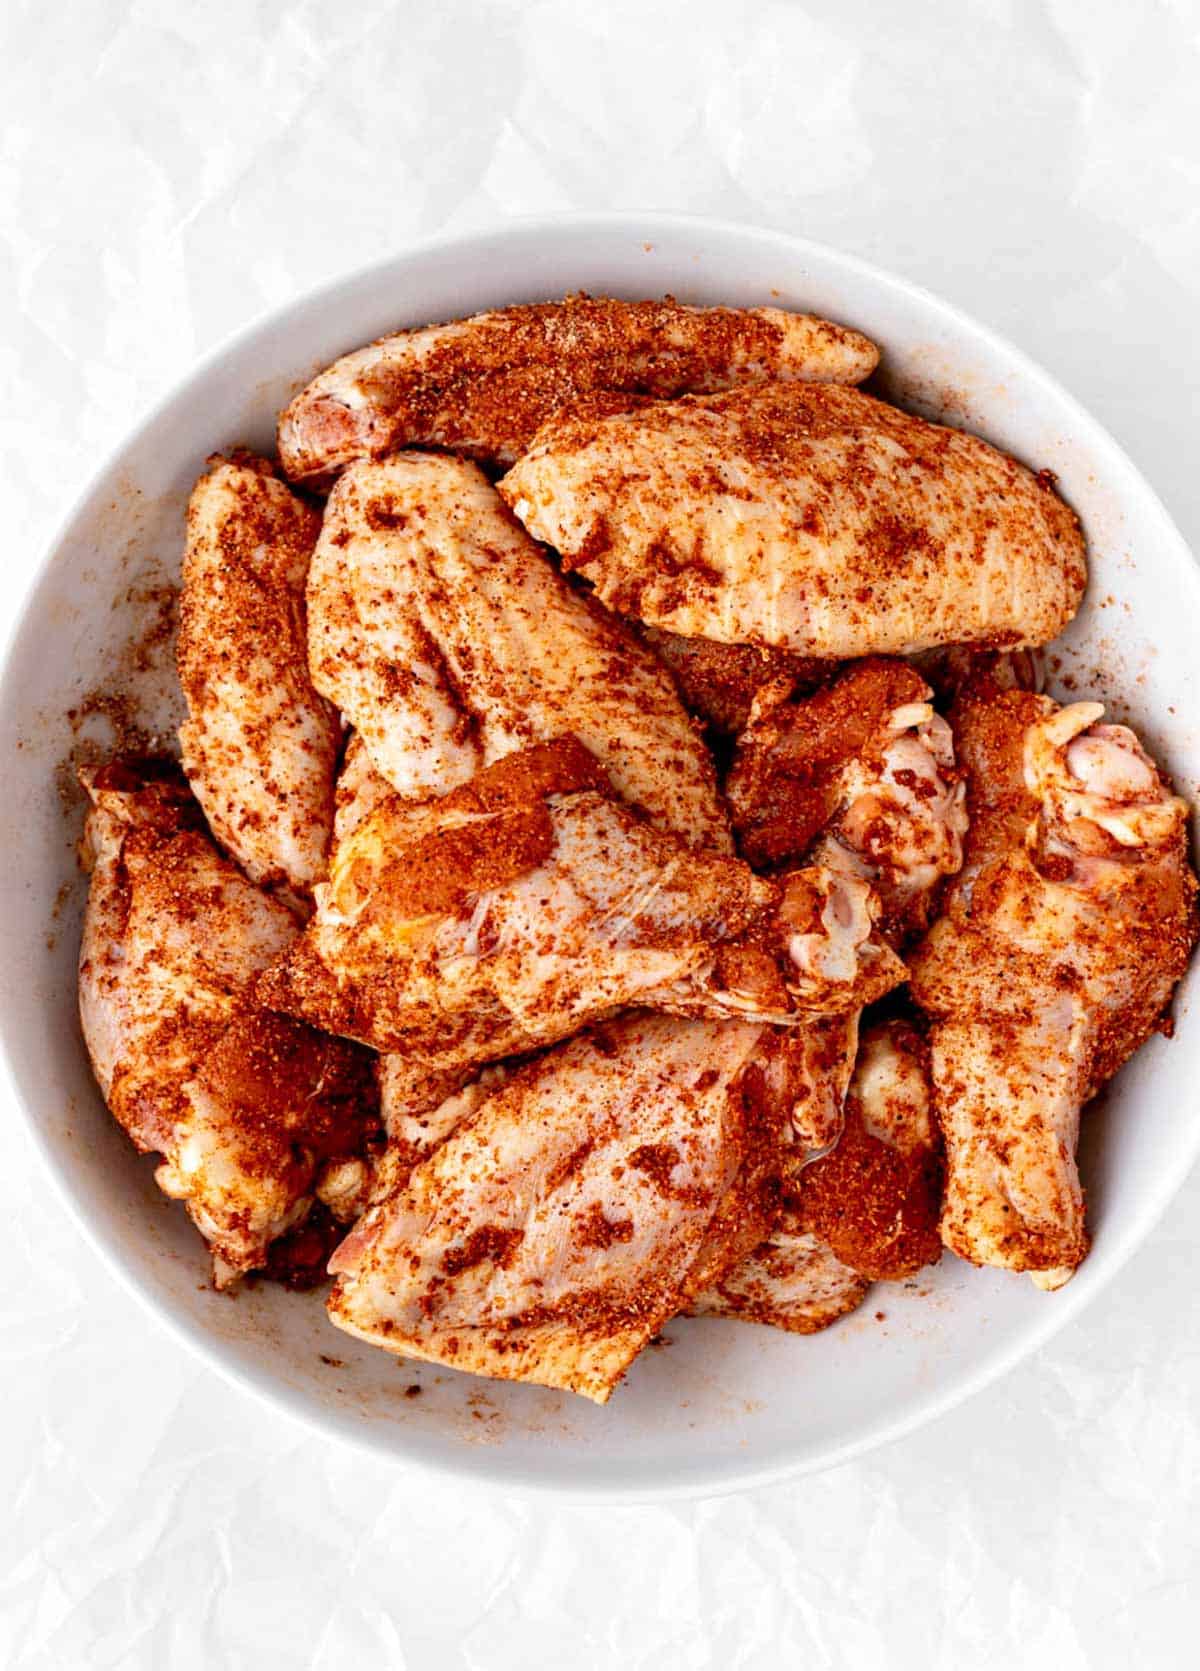 A bowl of chicken wings with the dry rub seasoning on them.